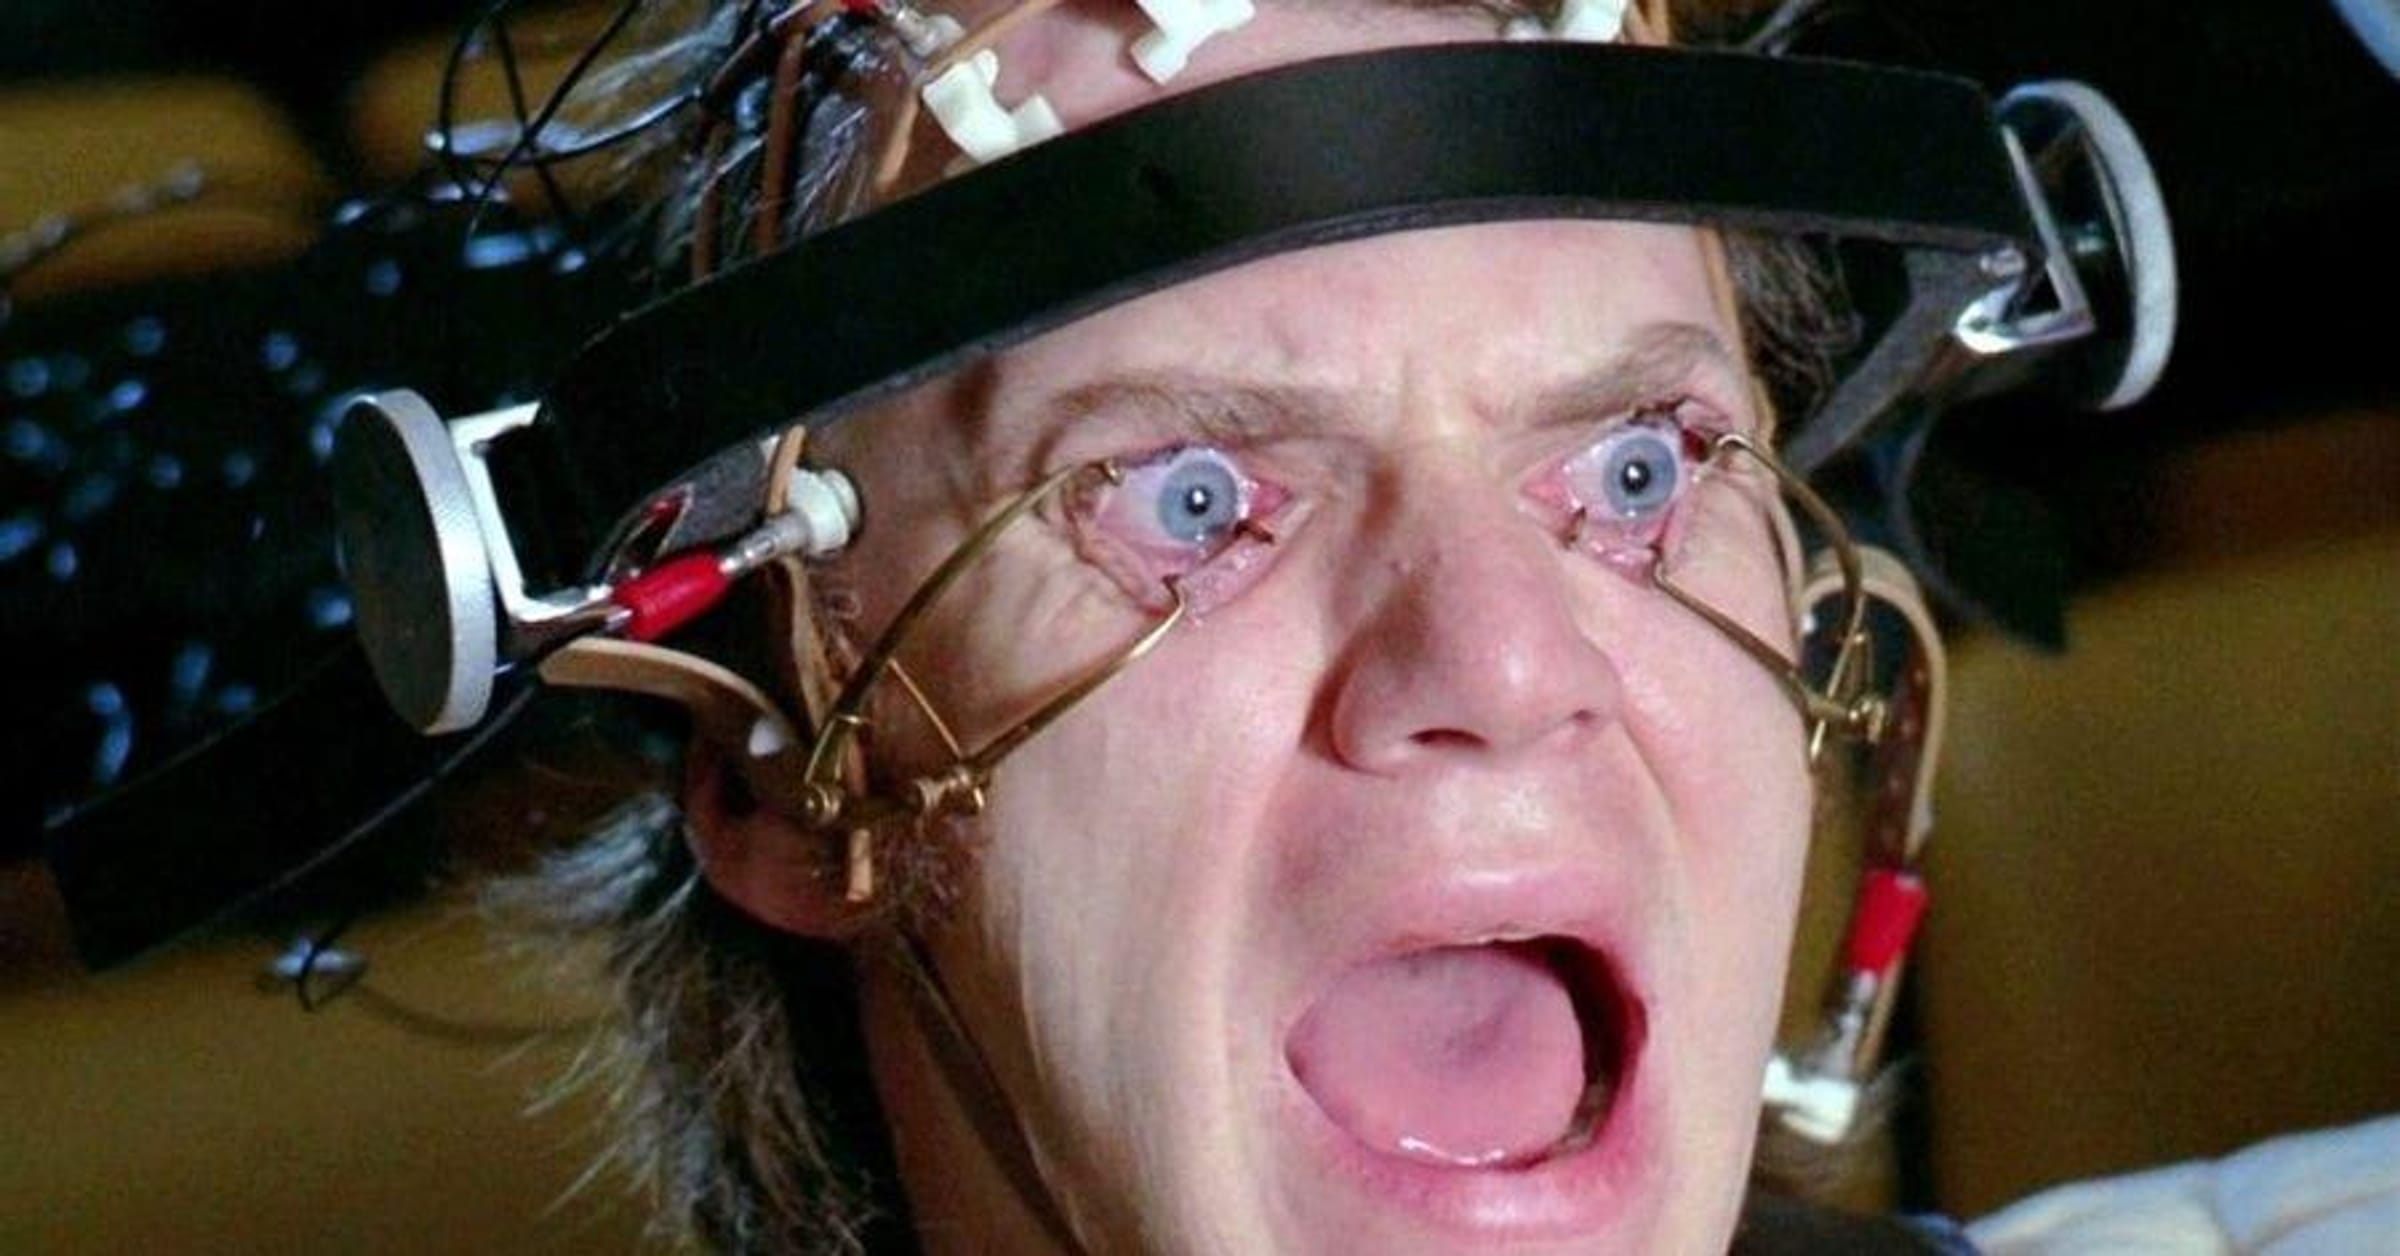 CLOCKWORK ORANGE' TO GET AN 'R' RATING - The New York Times